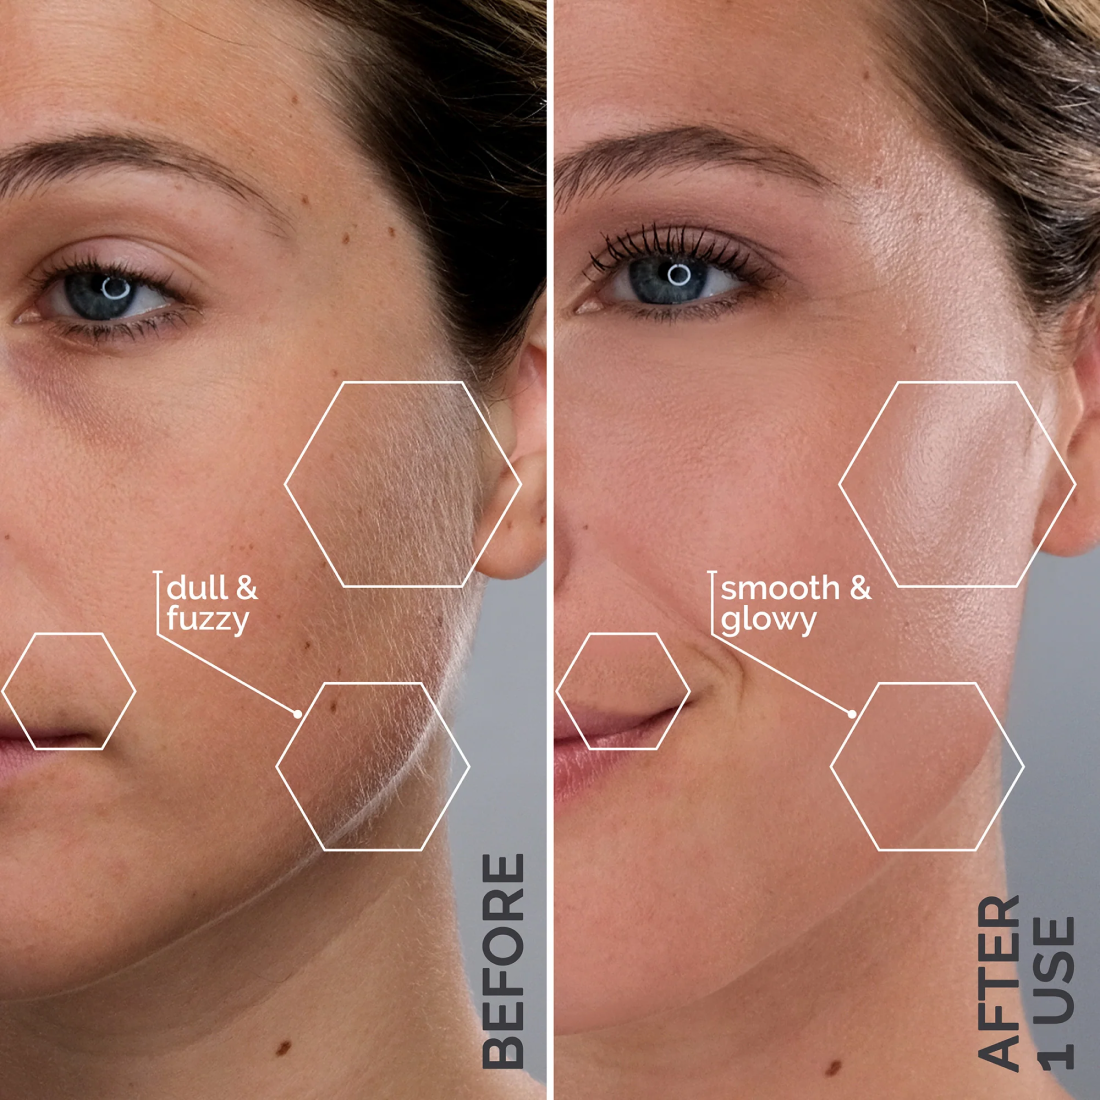 Pink. Split-image comparison of a woman's face before and after using Michael Todd Beauty's 4 in 1 Dermaplaning & Post Treatment System, highlighting smoother and glowier skin after use.